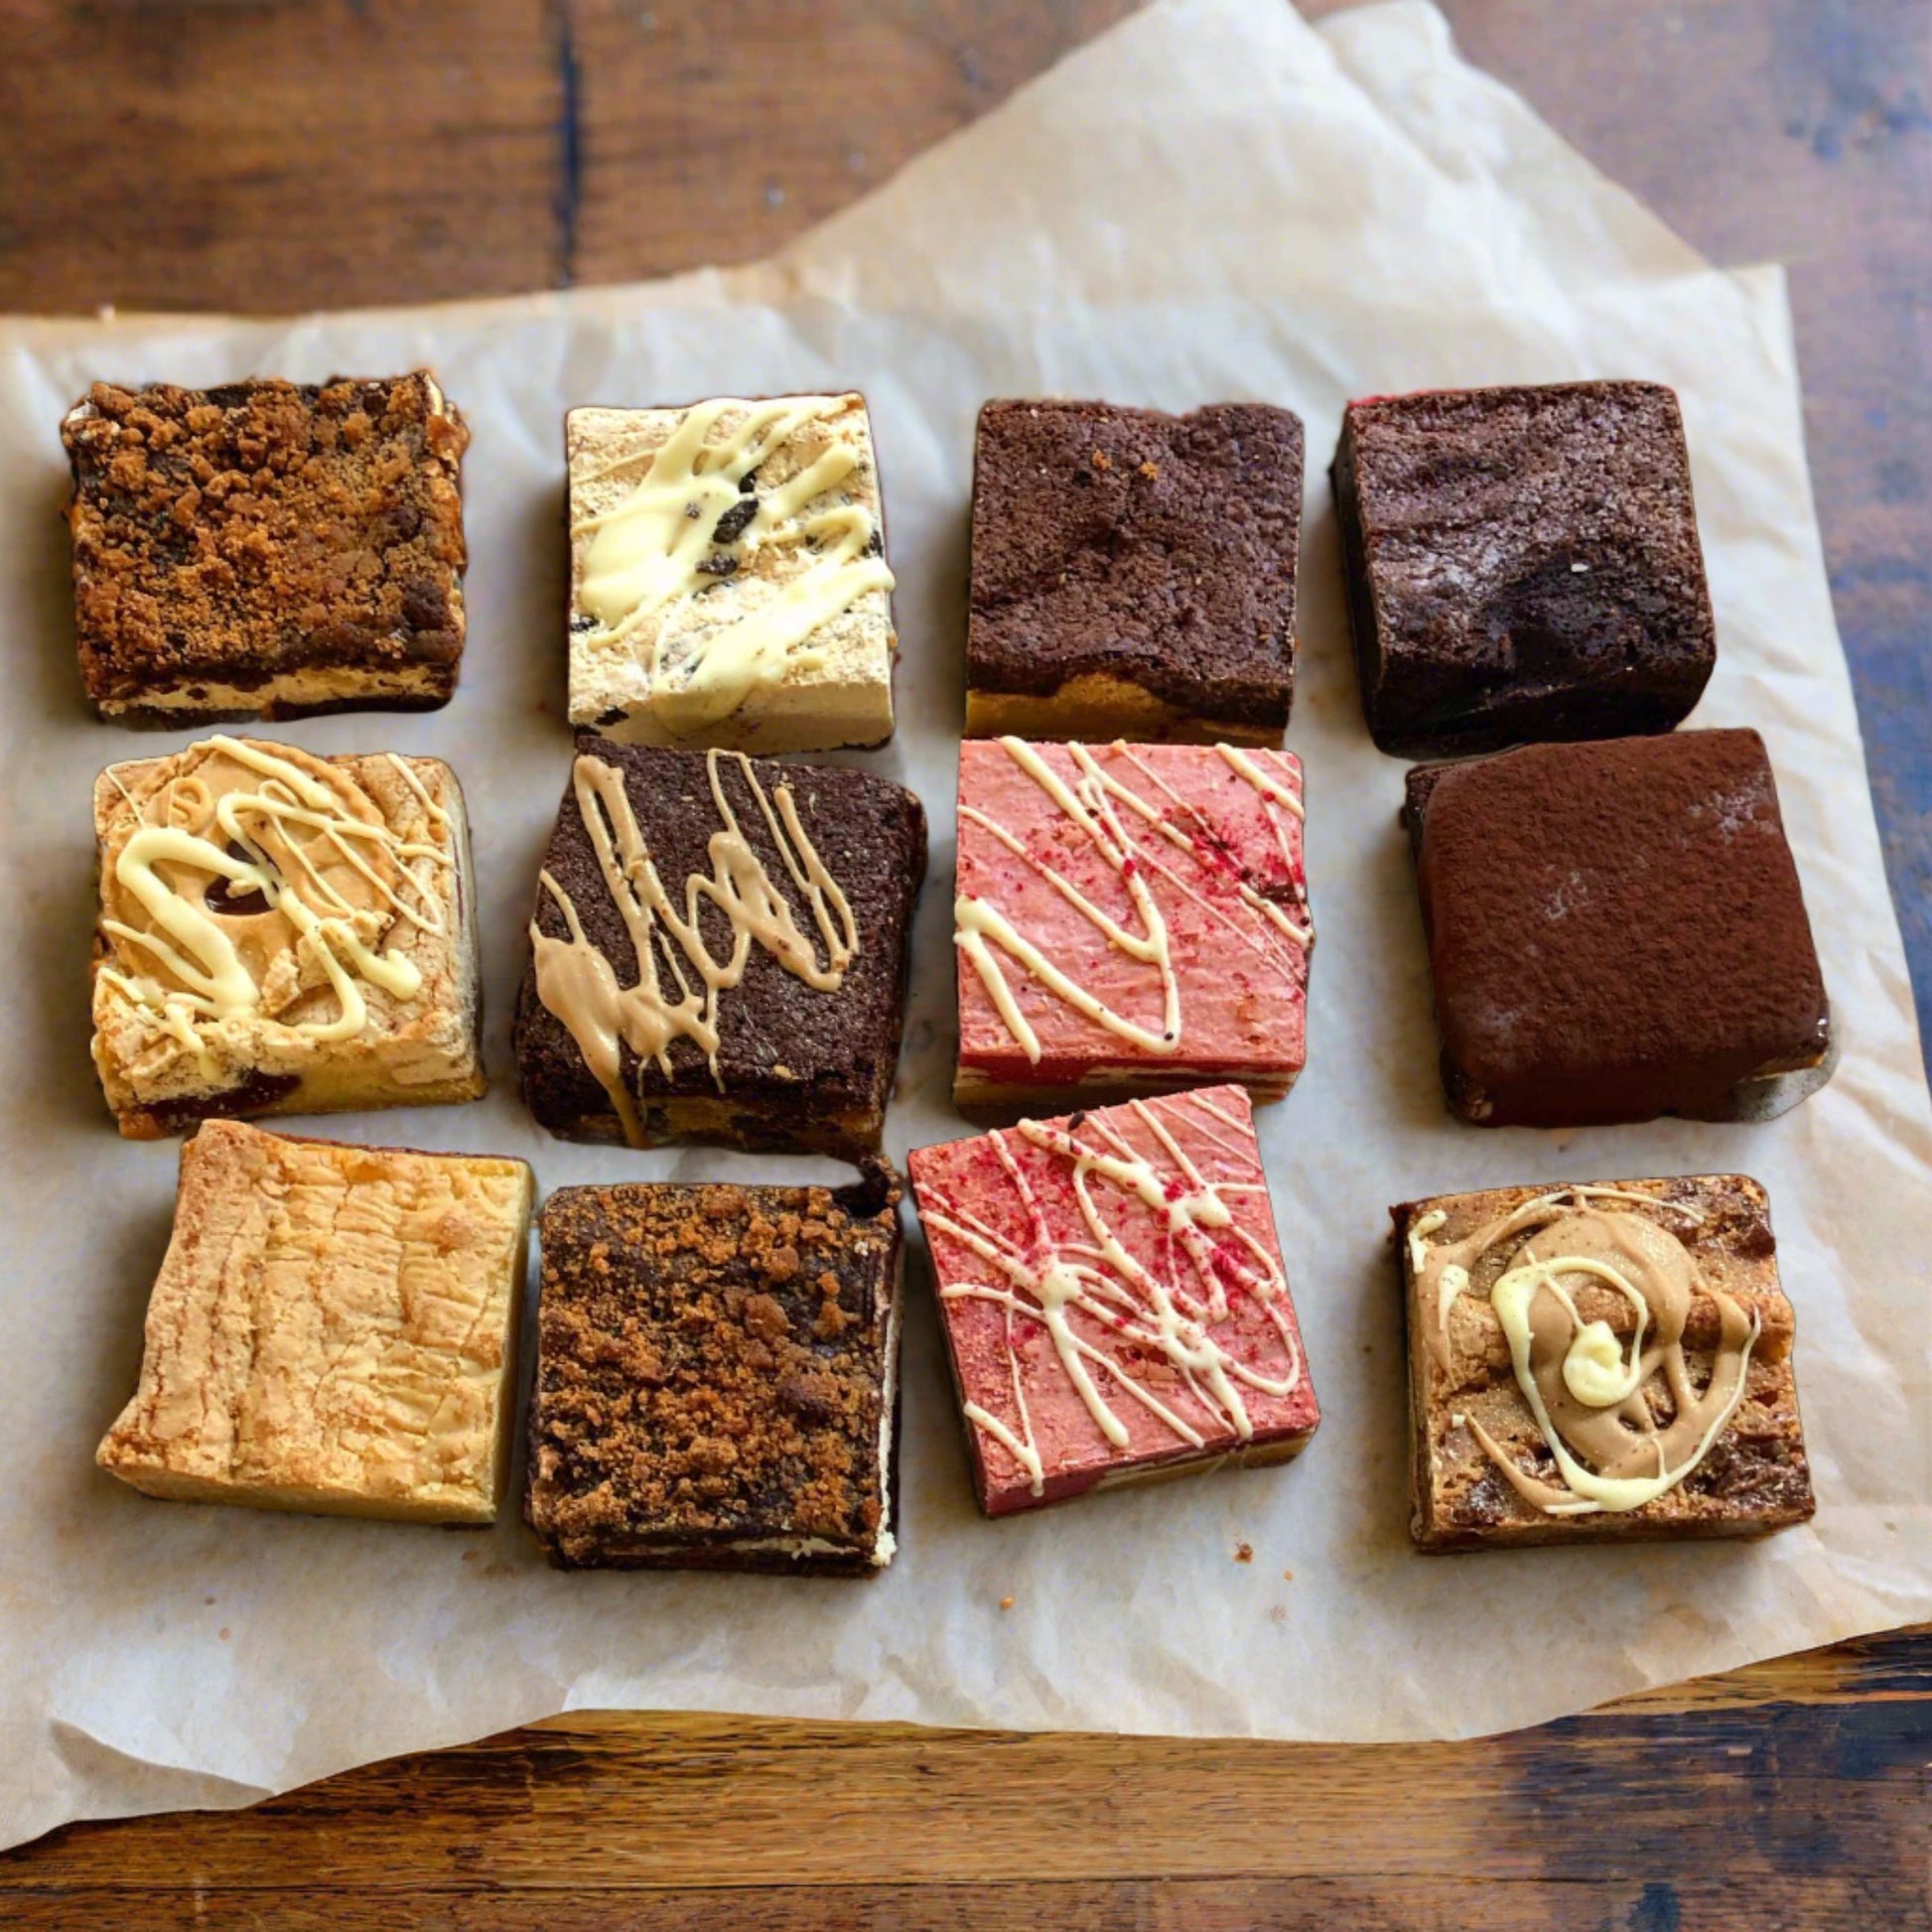 Mixed Selections of Chocolate Brownies - Brownie Heaven